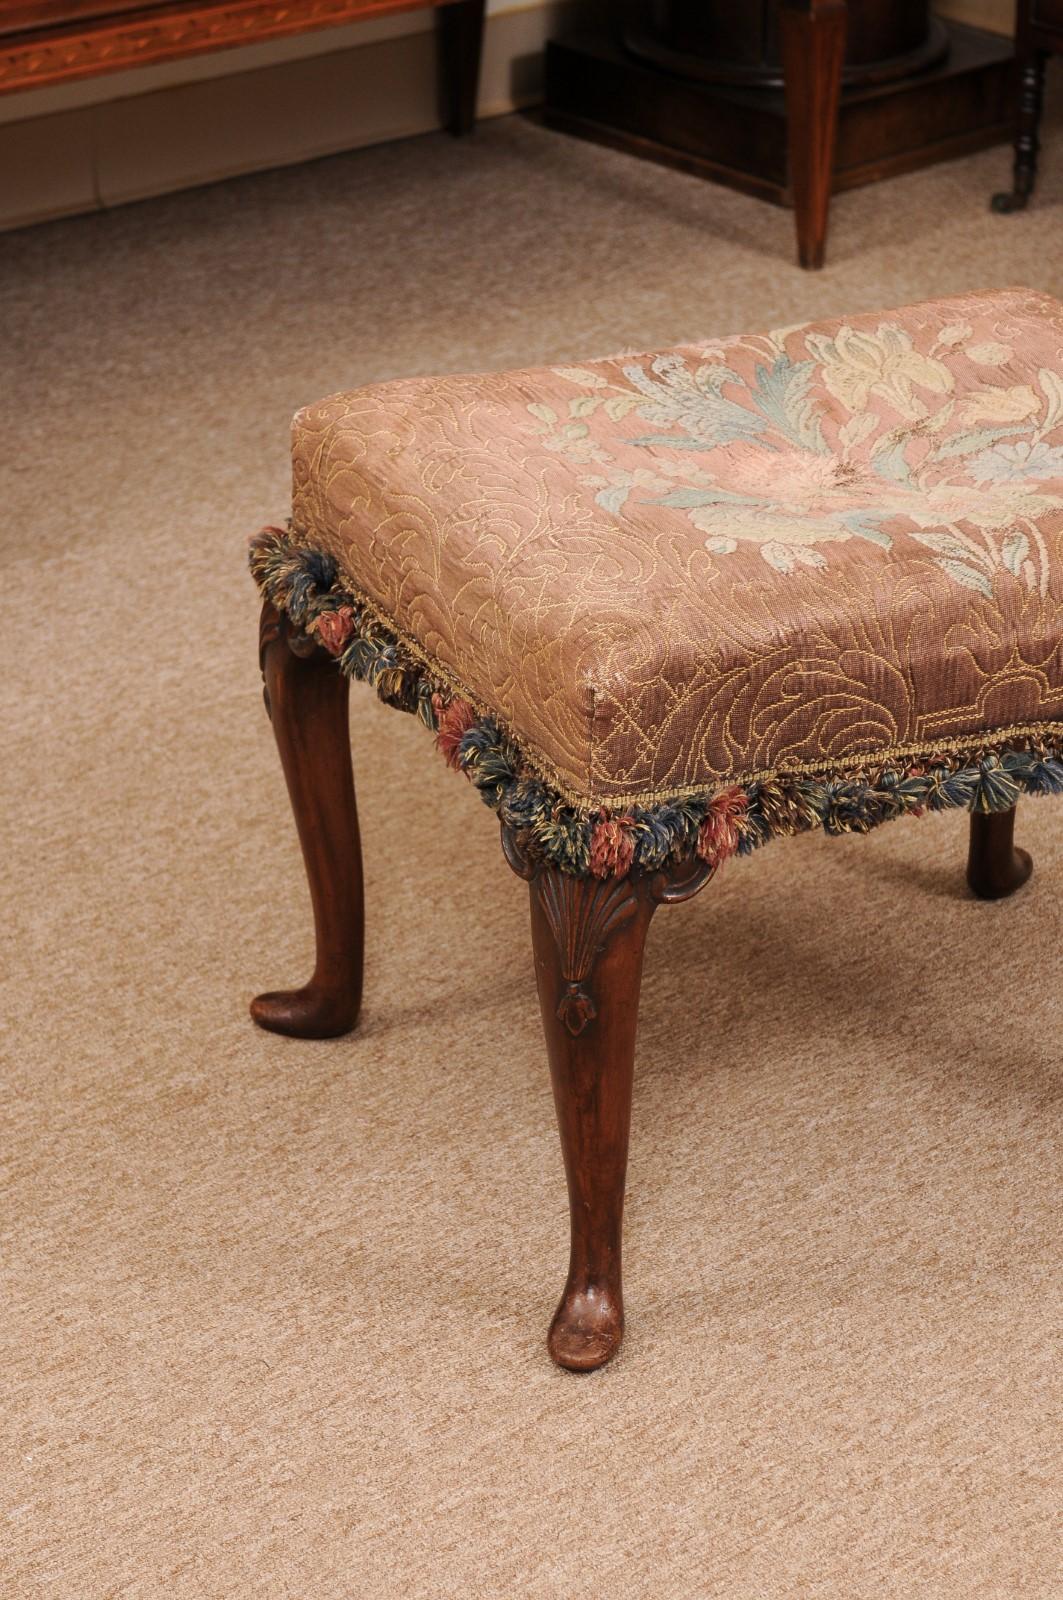  English Walnut Queen Anne Style Stool with Needlepoint In Good Condition For Sale In Atlanta, GA